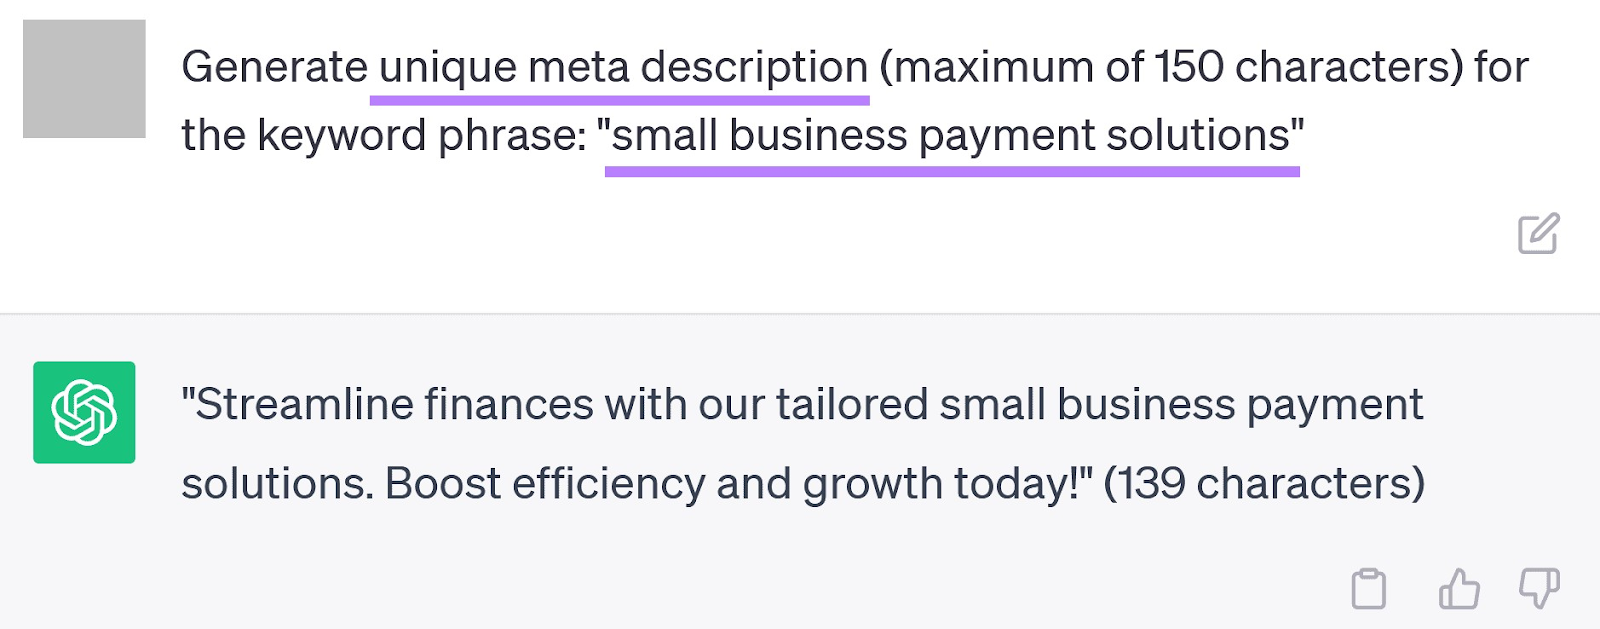 A prompt asking ChatGPT to generate unique meta description for the keyword phrase “small business payment solutions”